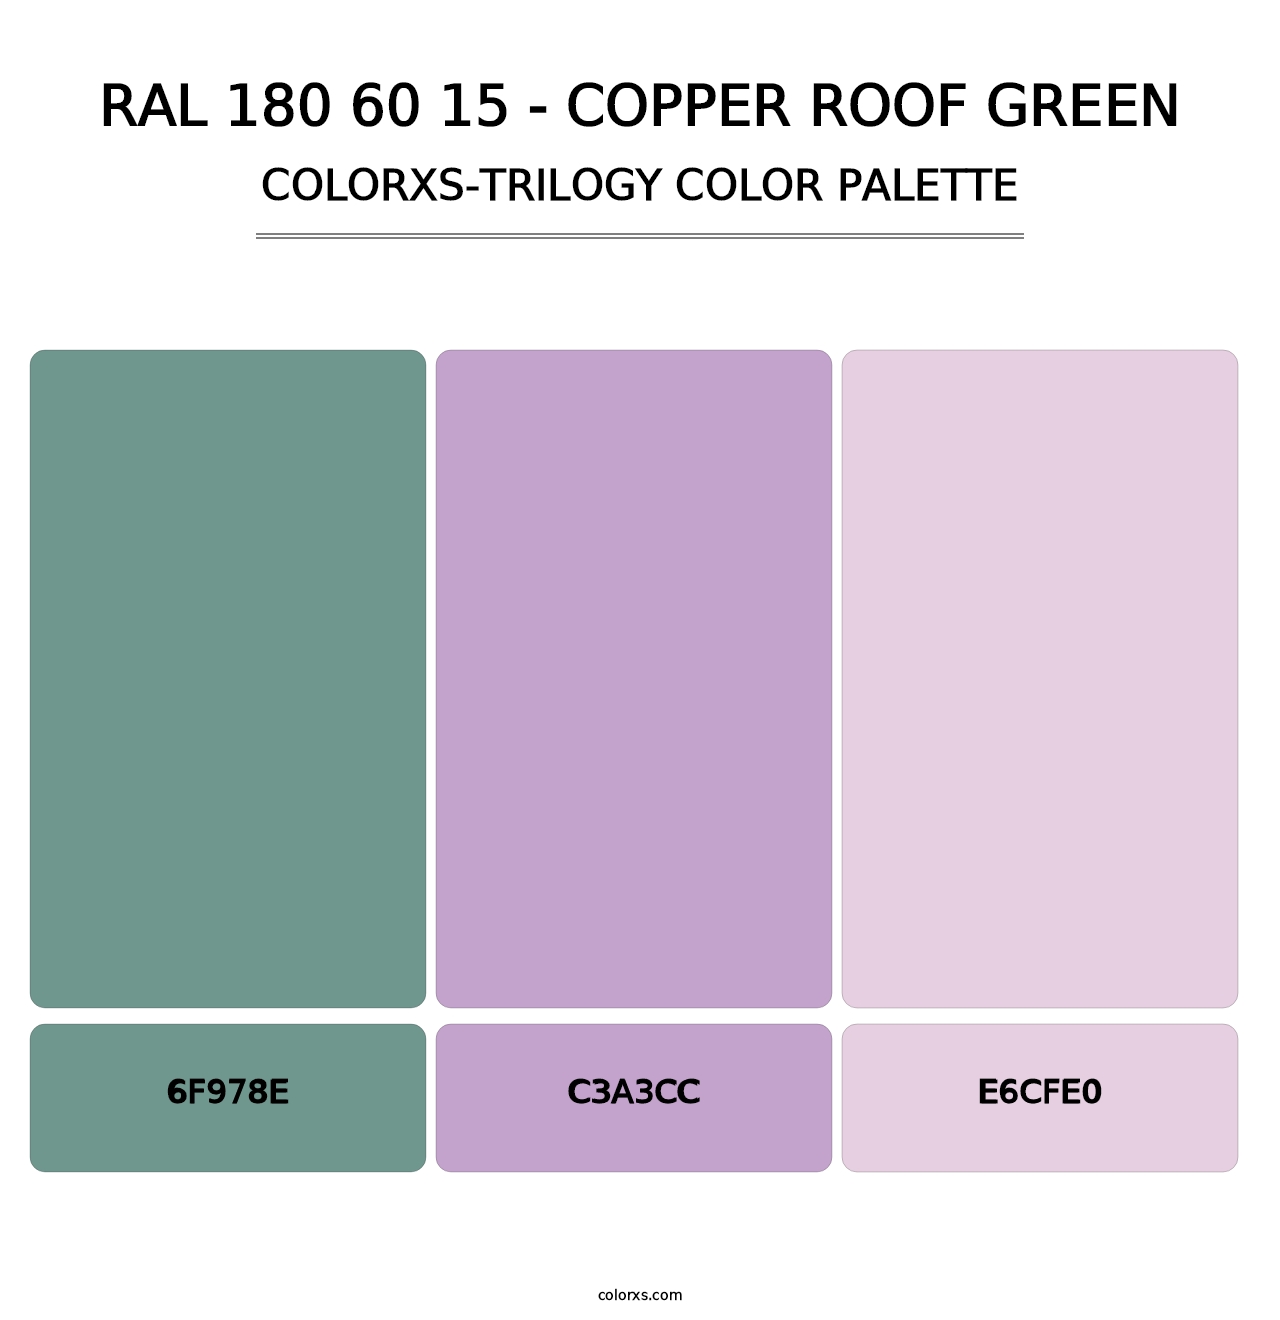 RAL 180 60 15 - Copper Roof Green - Colorxs Trilogy Palette